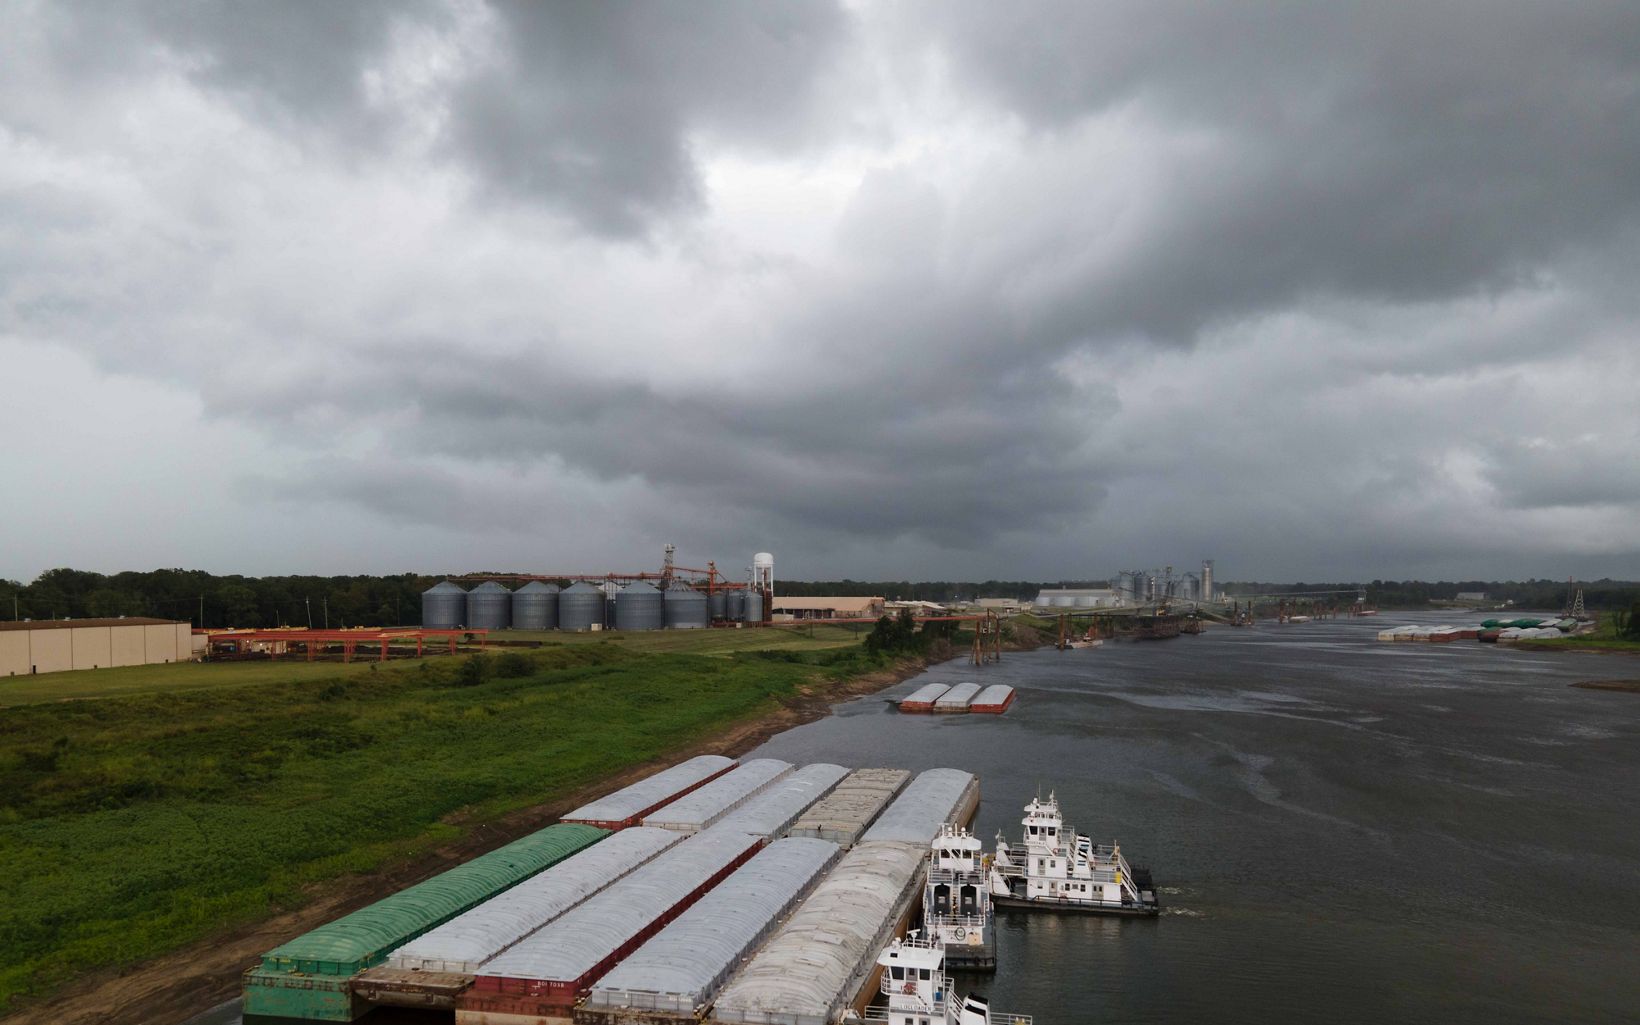 Barges are docked against a river under dark, cloudy skies. in the background are rows of silos and other industrial buildings. 